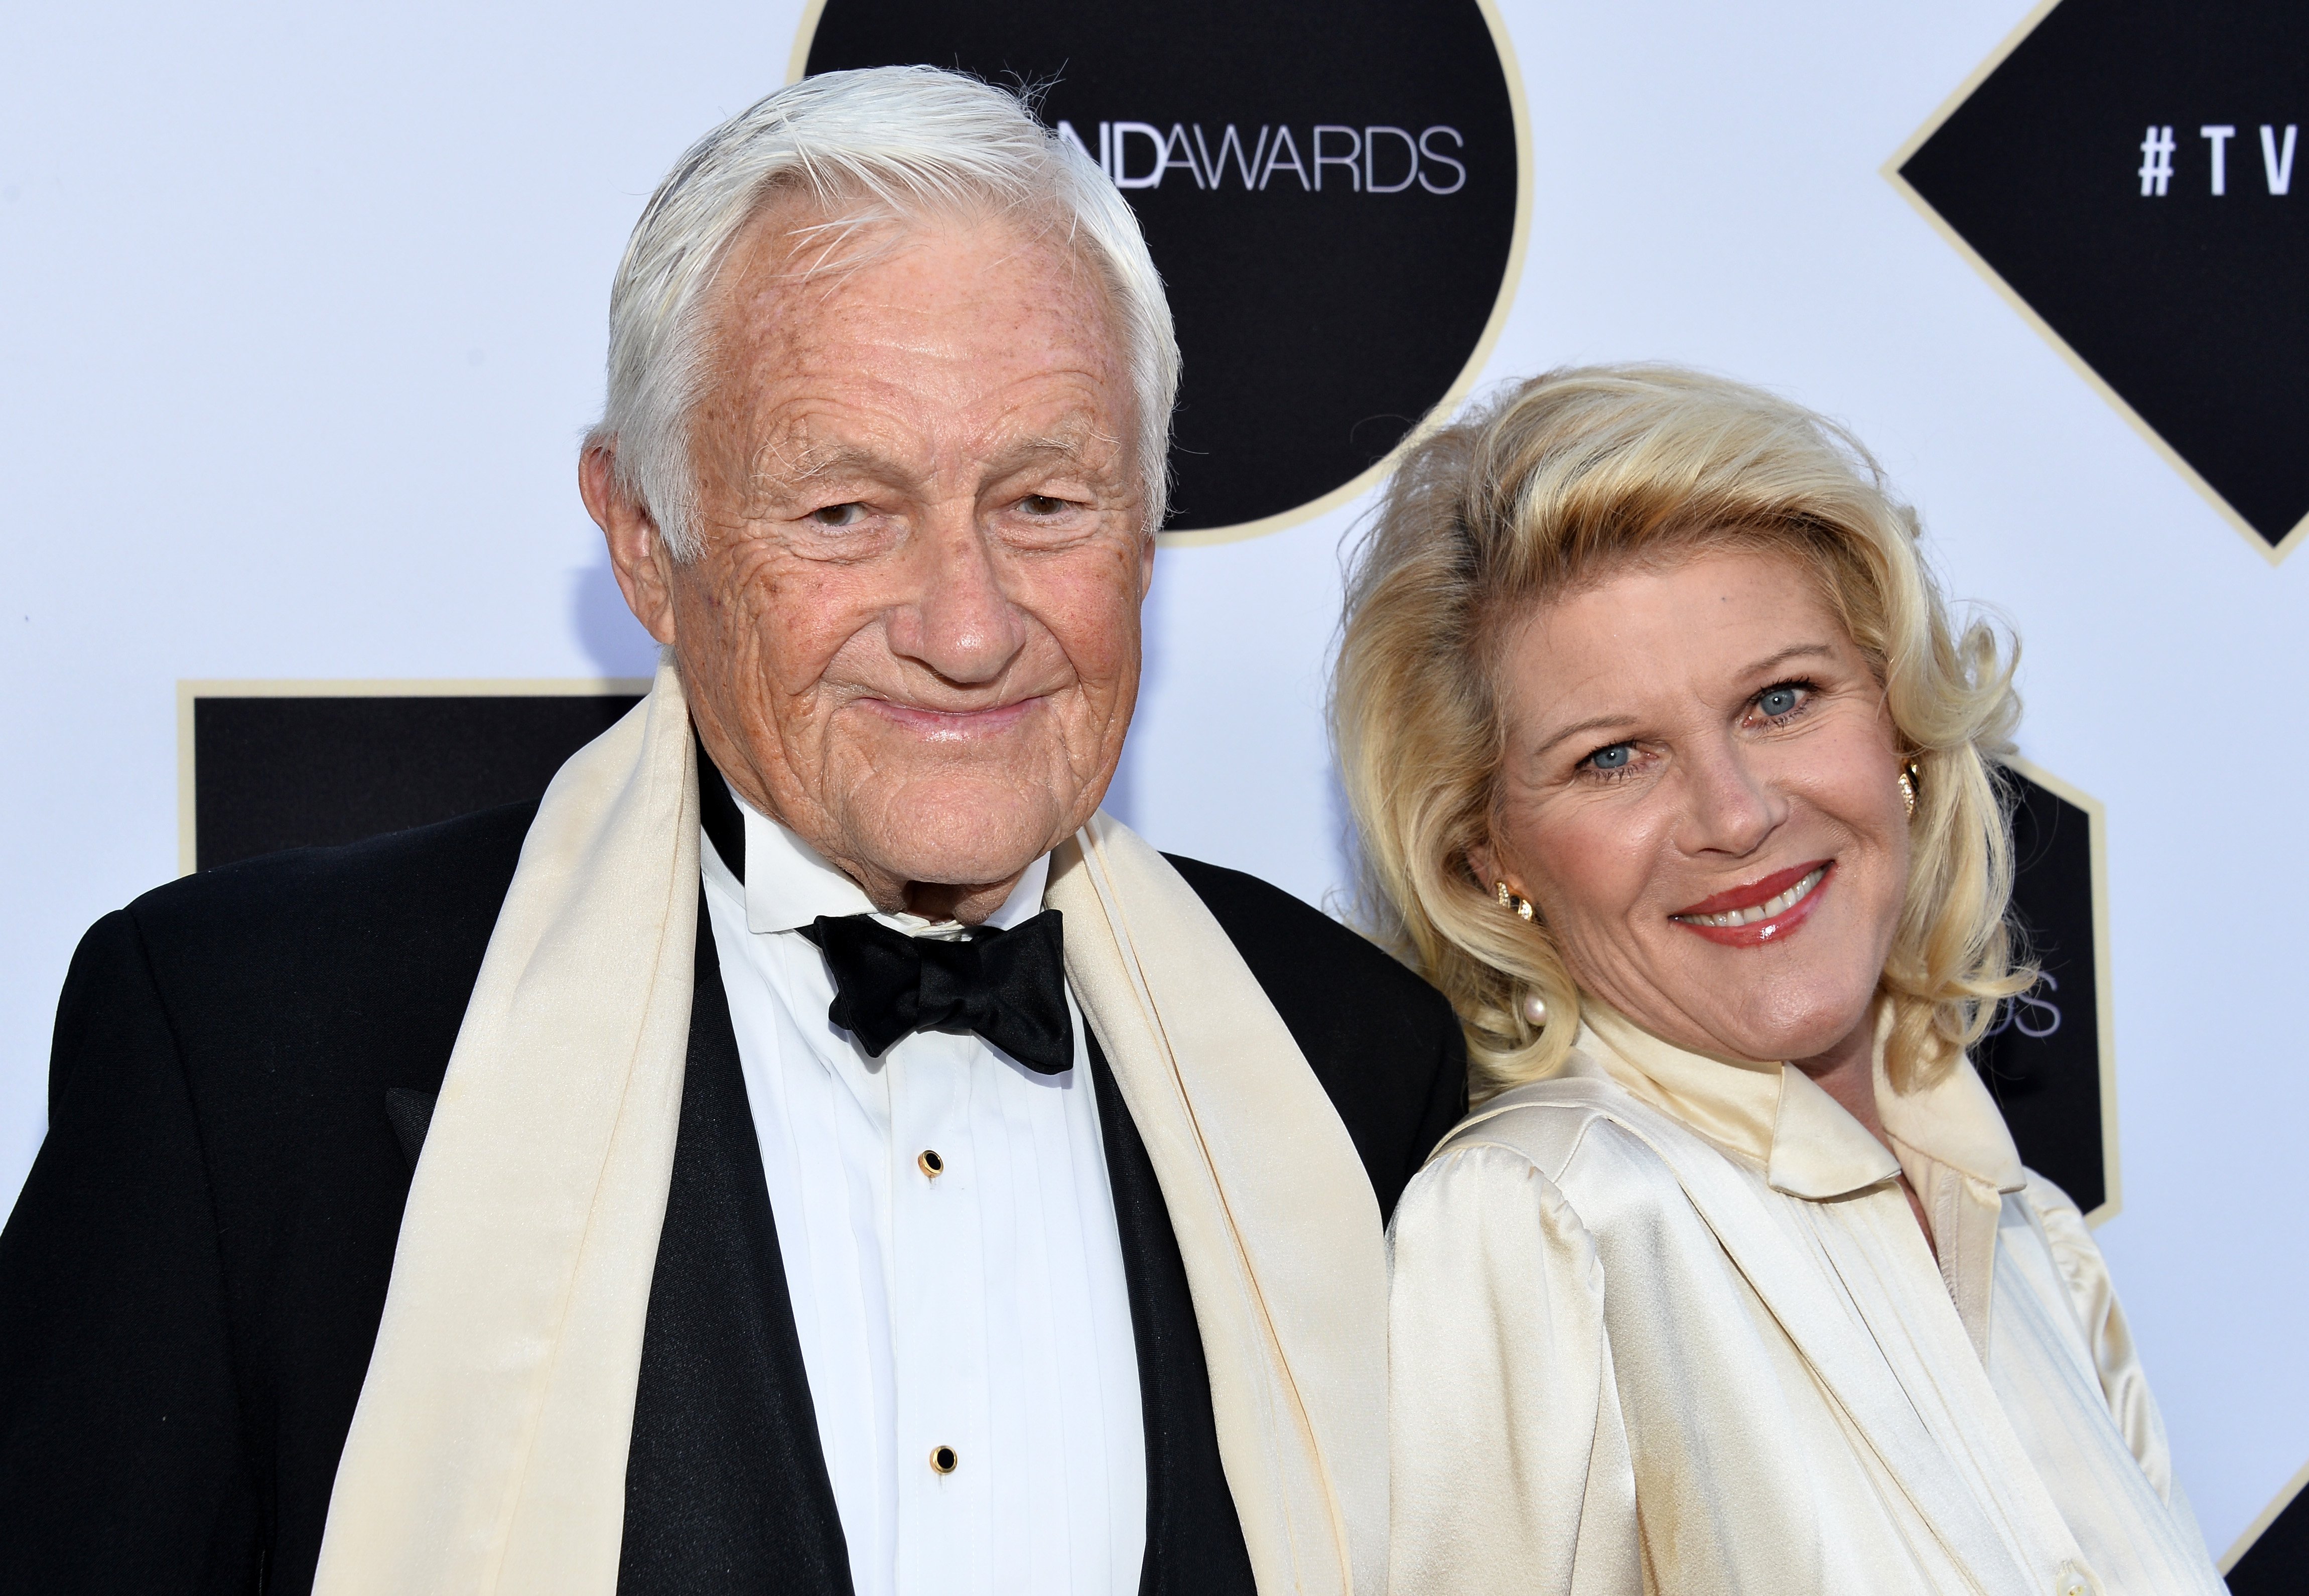 Actor Orson Bean and actress Alley Mills arrive at the 2015 TV Land Awards at the Saban Theatre on April 11, 2015 in Beverly Hills, California | Photo: Getty Images